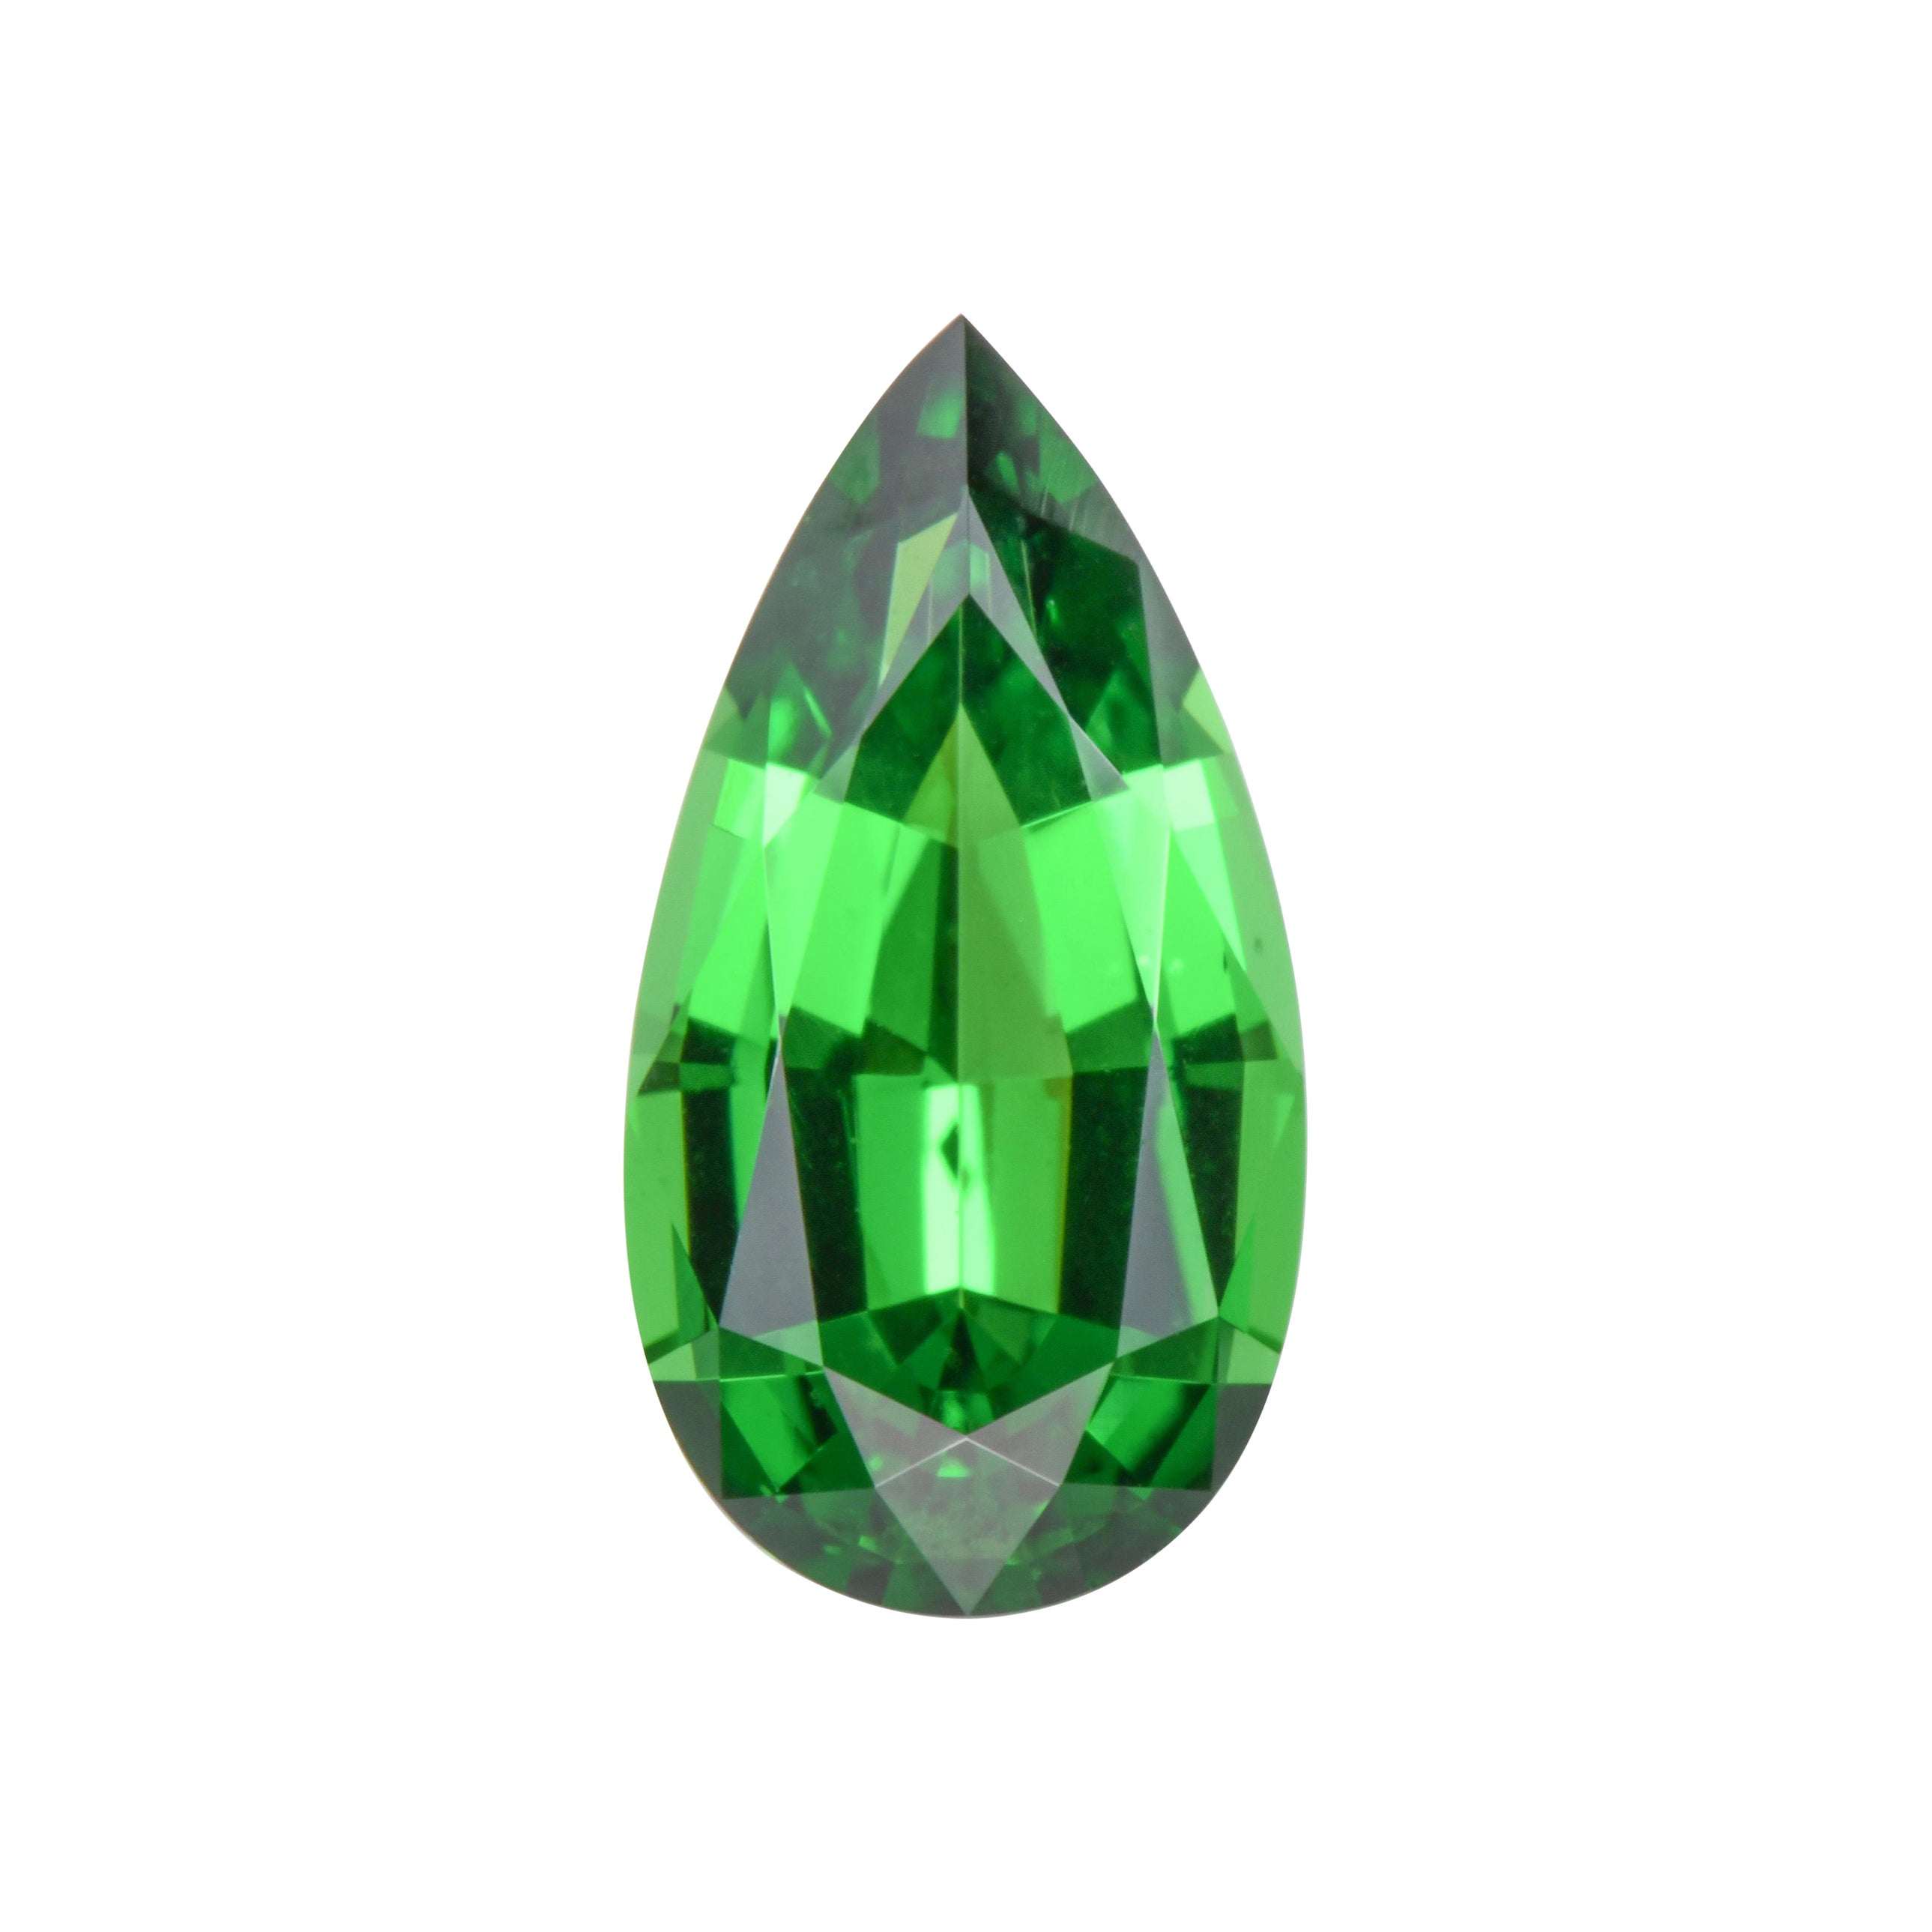 Superb 2.04 carat Tsavorite Garnet pear shape unmounted gem, offered loose to a fine gemstone collector.
Dimensions: 11.50 x 6.10 x 4.10 mm
Returns are accepted and paid by us within 7 days of delivery.
We offer supreme custom jewelry work upon